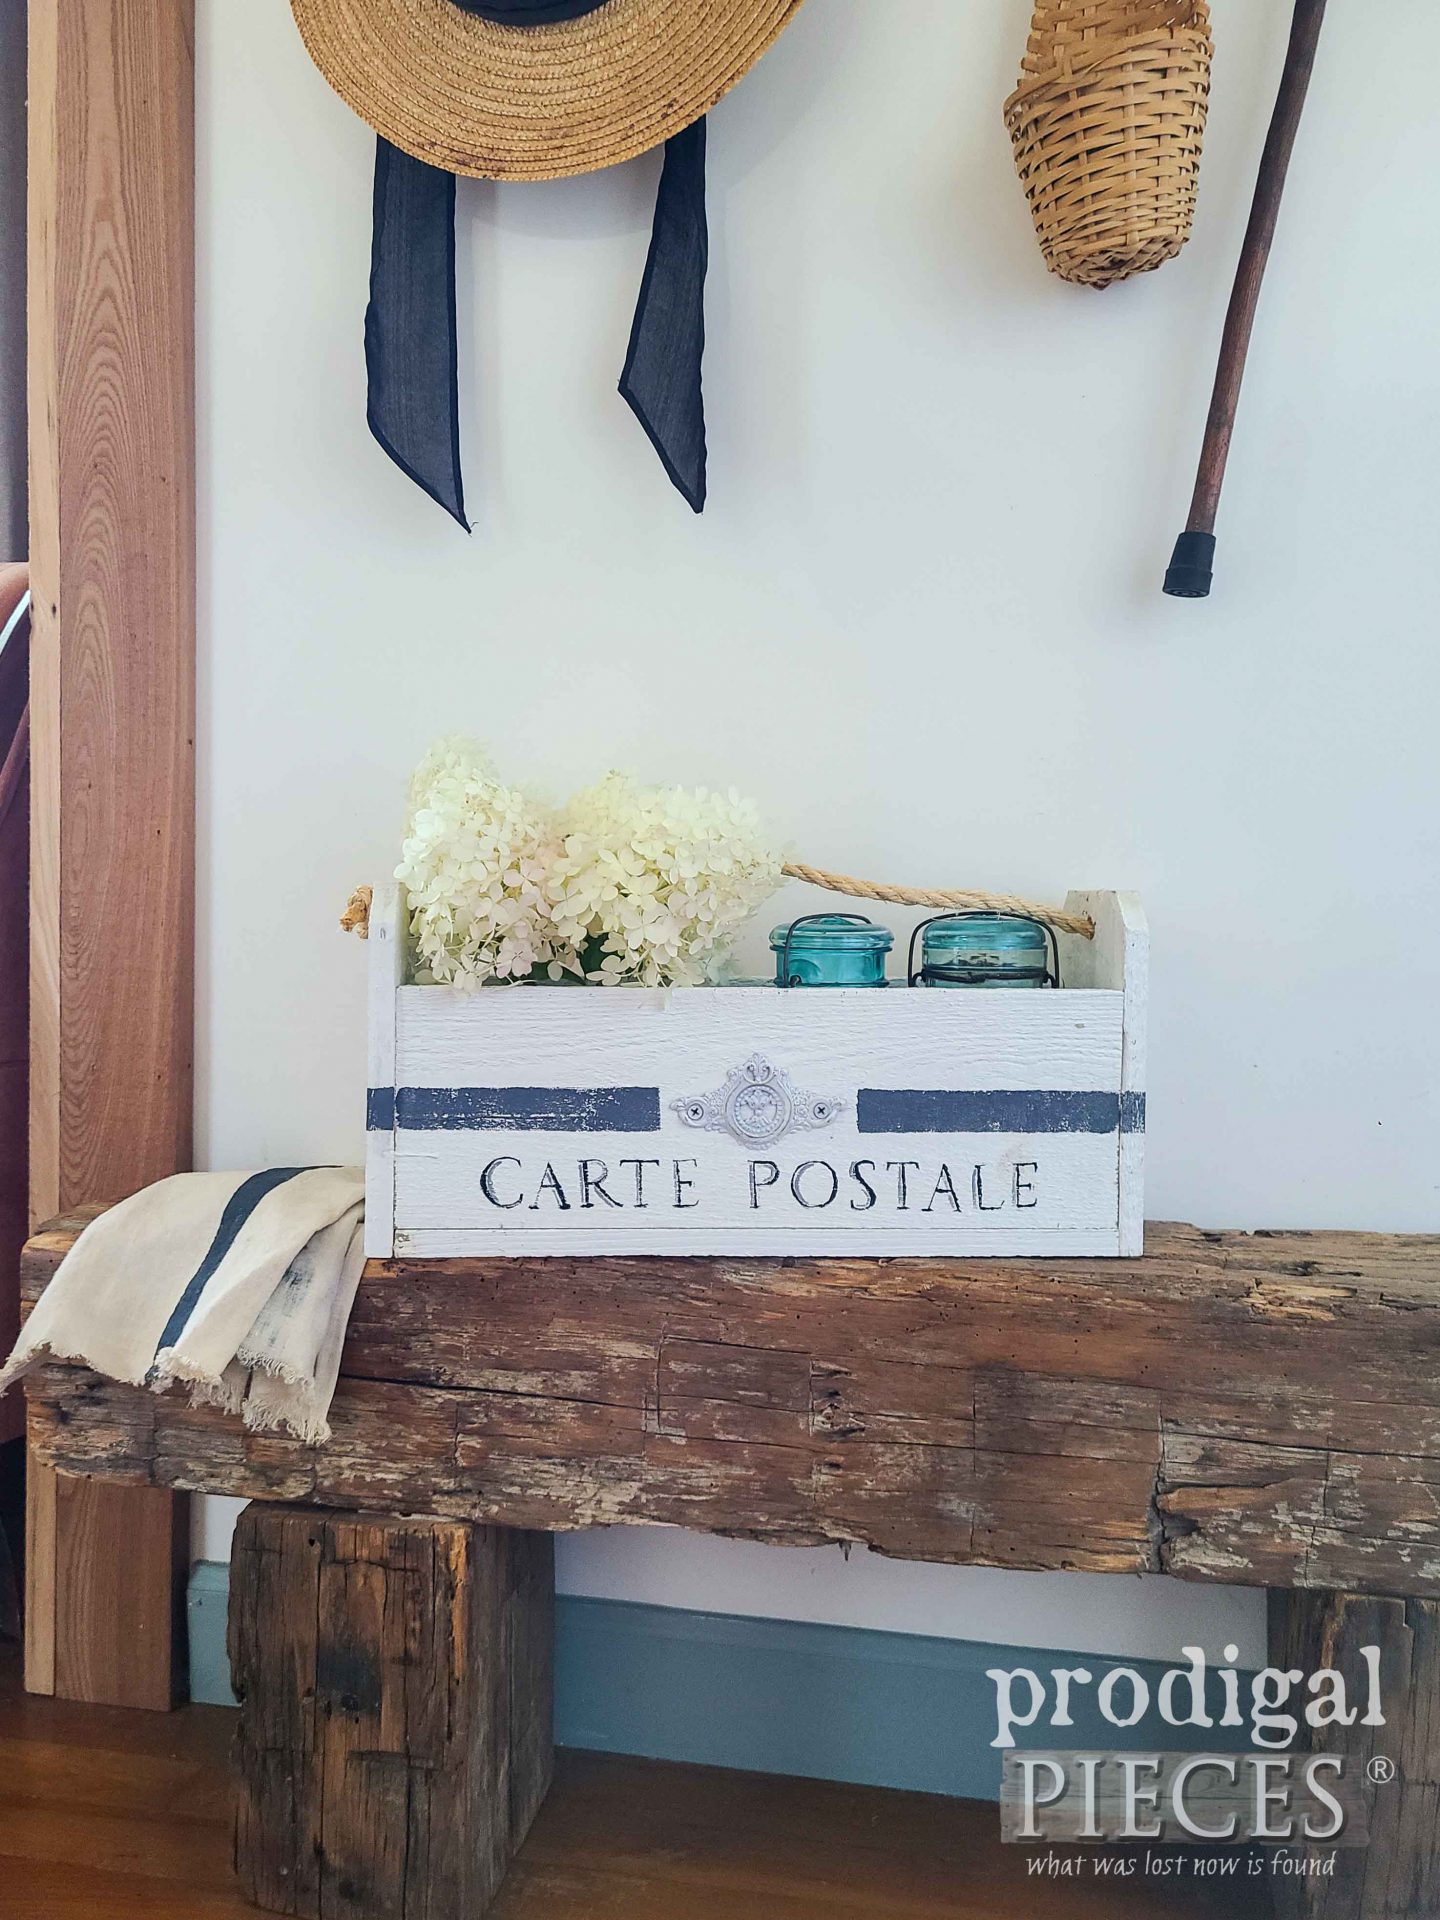 French Farmhouse DIY Tote from Upcycled Fence Panels by Larissa of Prodigal Pieces | prodigalpieces.com #prodigalpieces #french #farmhouse